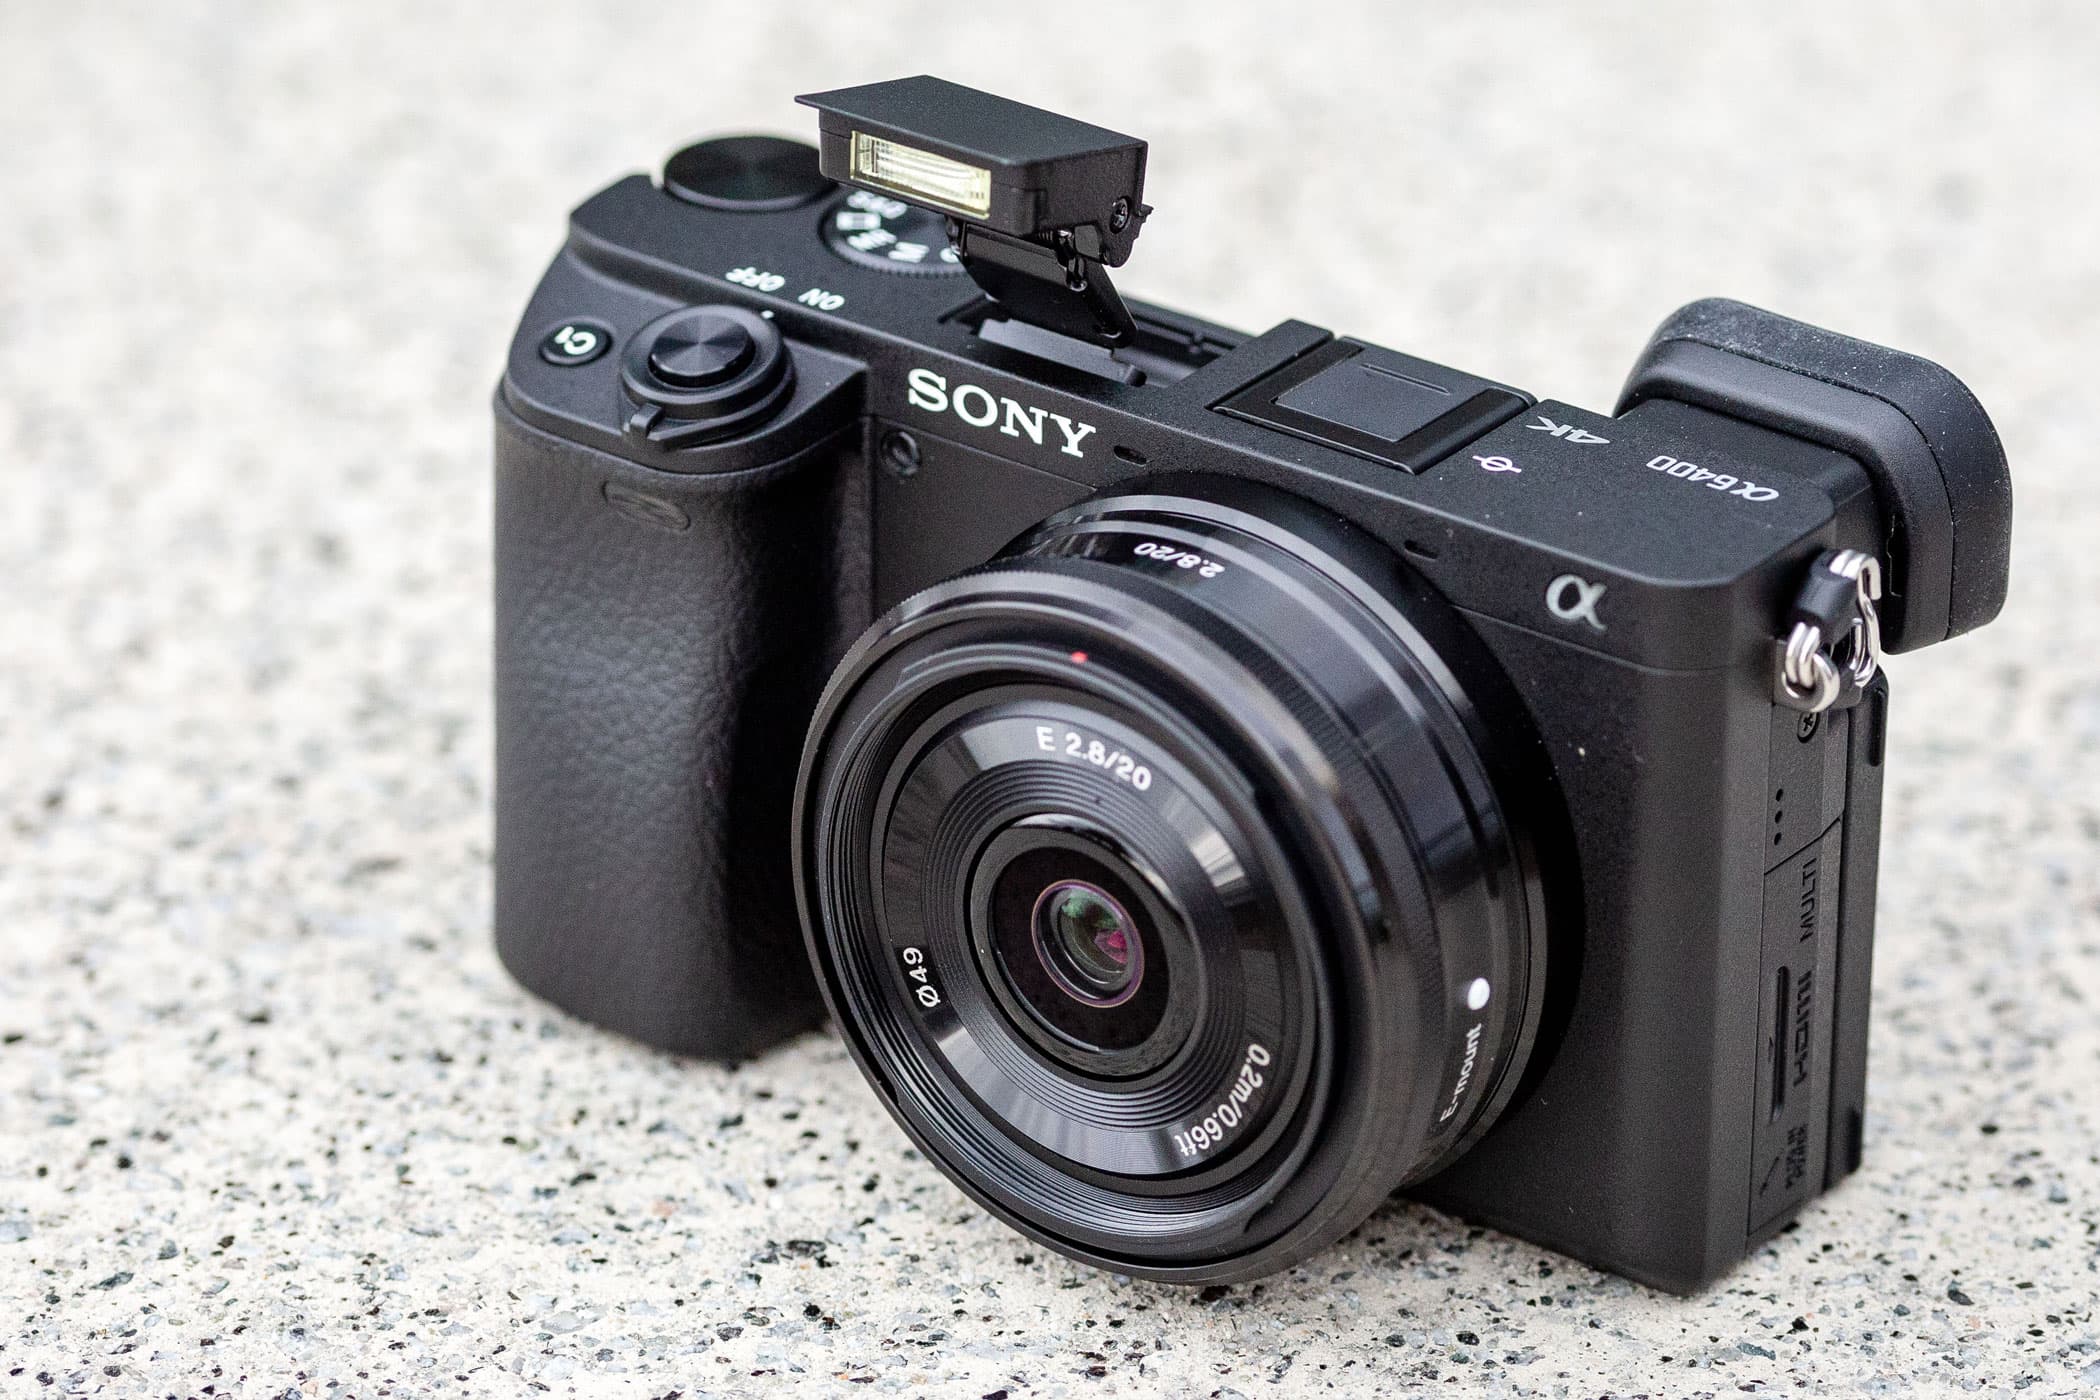 Sony a6400 review: A quality mirrorless camera with amazing